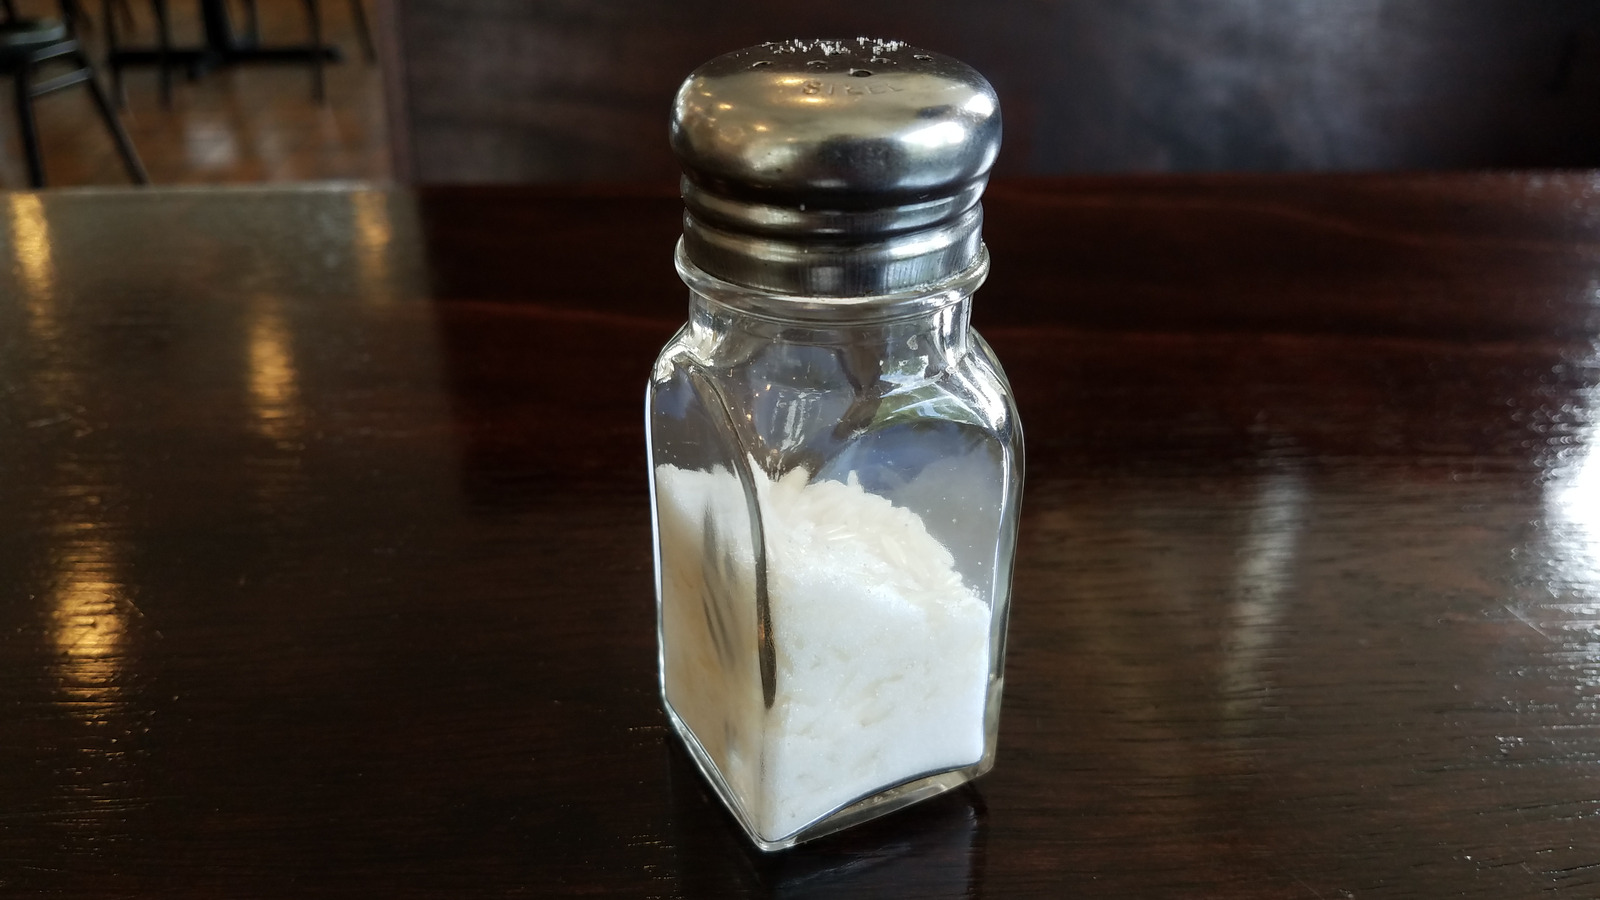 Why Do Restaurants Put Rice in the Salt Shakers?